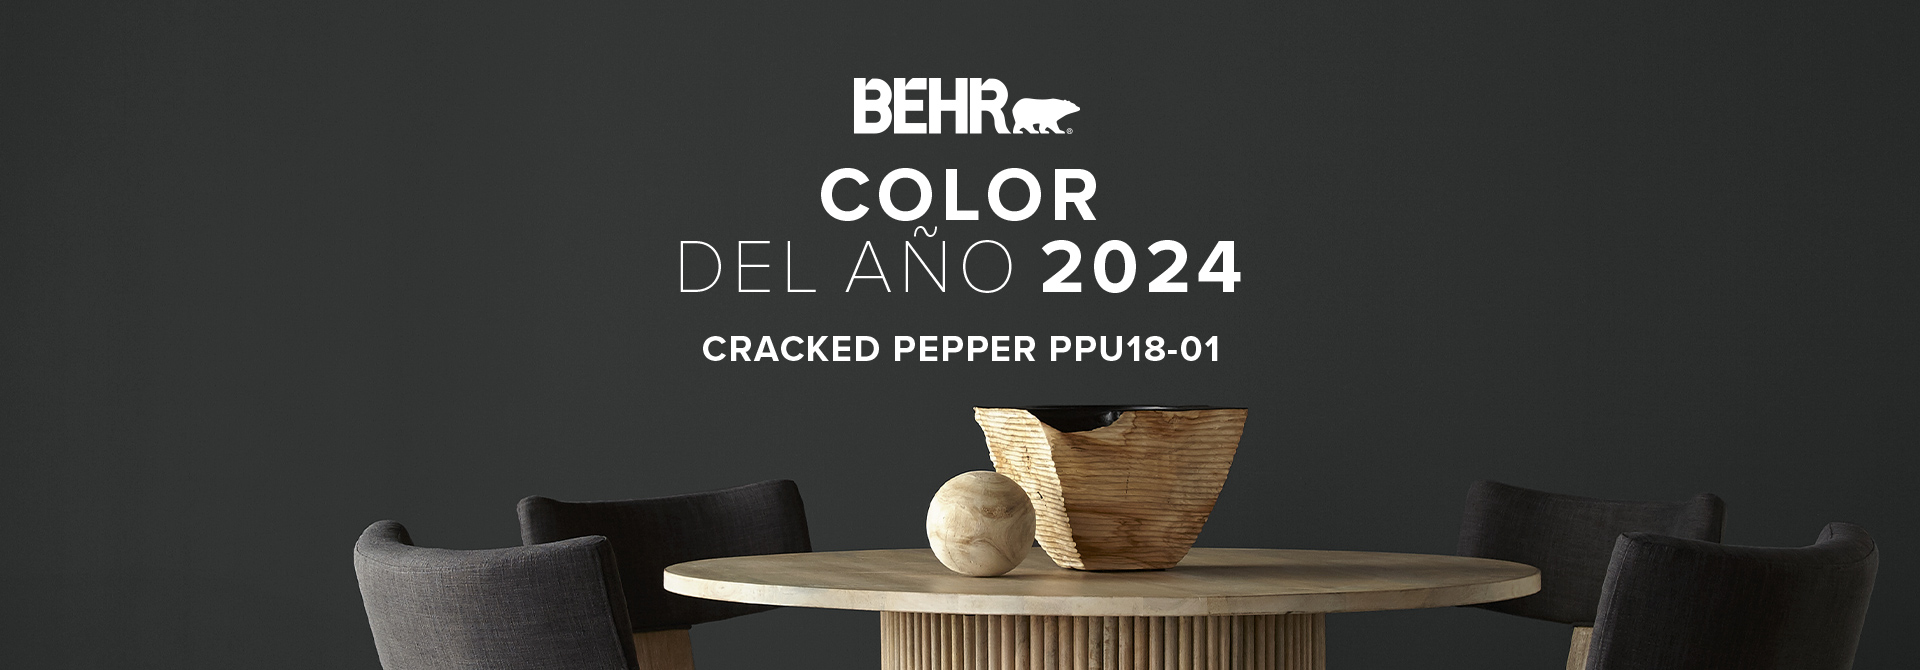 Bedroom painted in Cracked Pepper, featuring Behr 2024 Color of the Year, Cracked Pepper